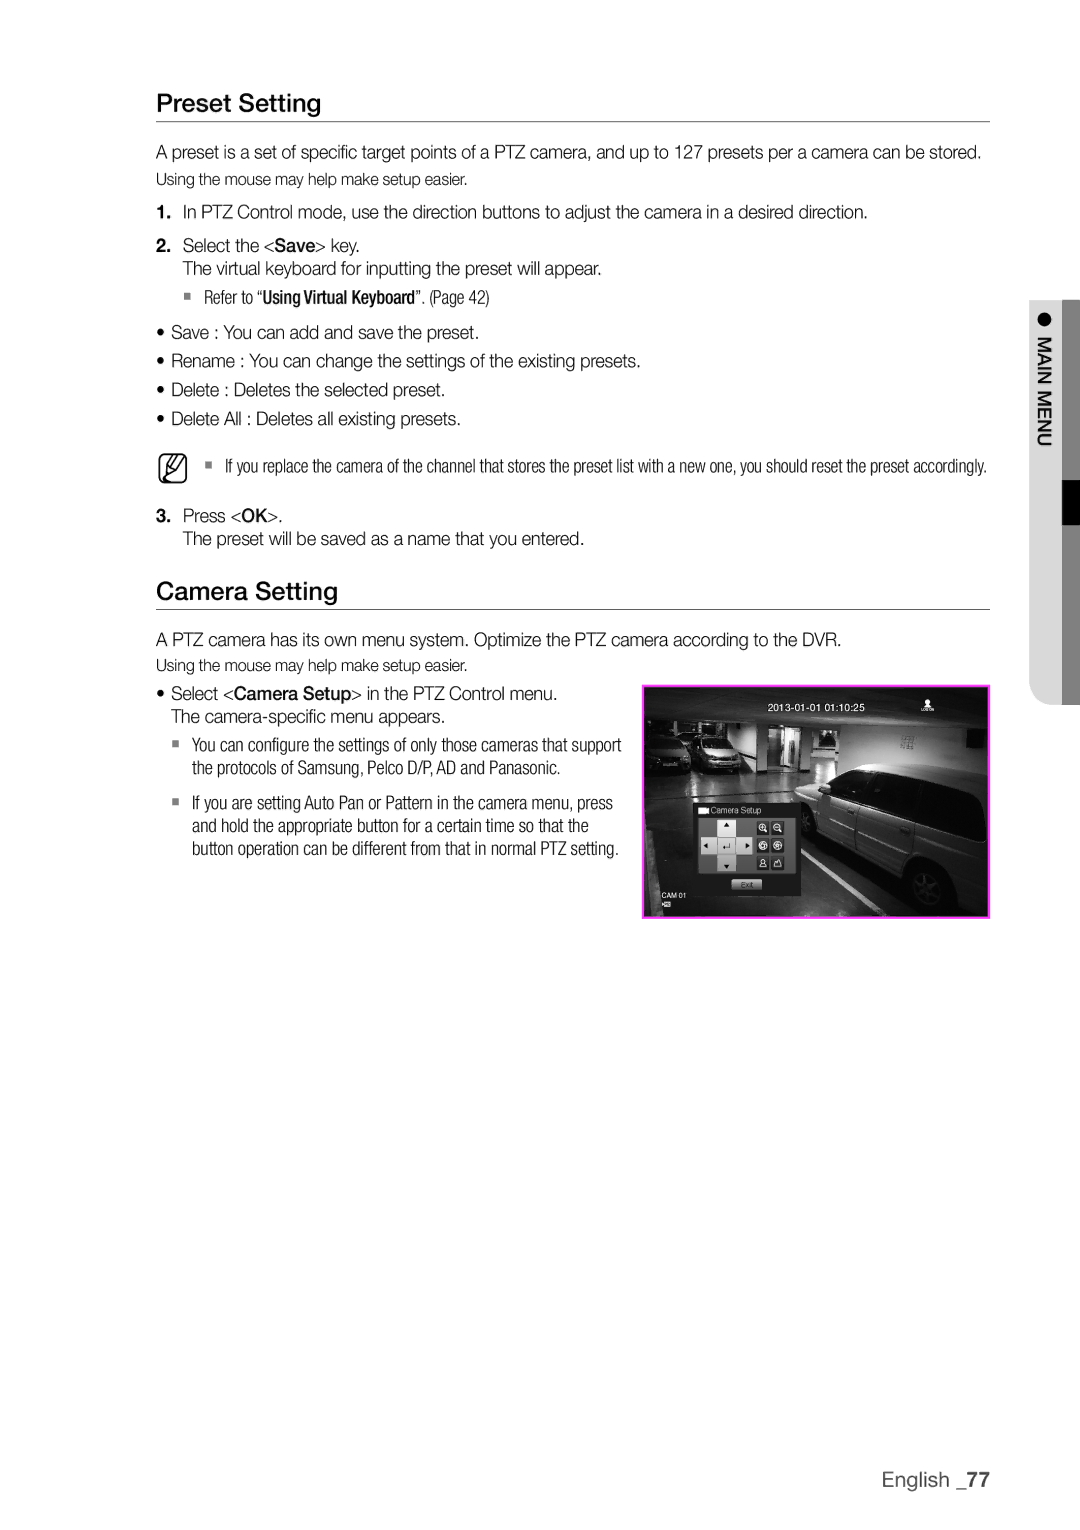 Samsung SDHP4080 user manual Preset Setting, Camera Setting, Press OK Preset will be saved as a name that you entered 